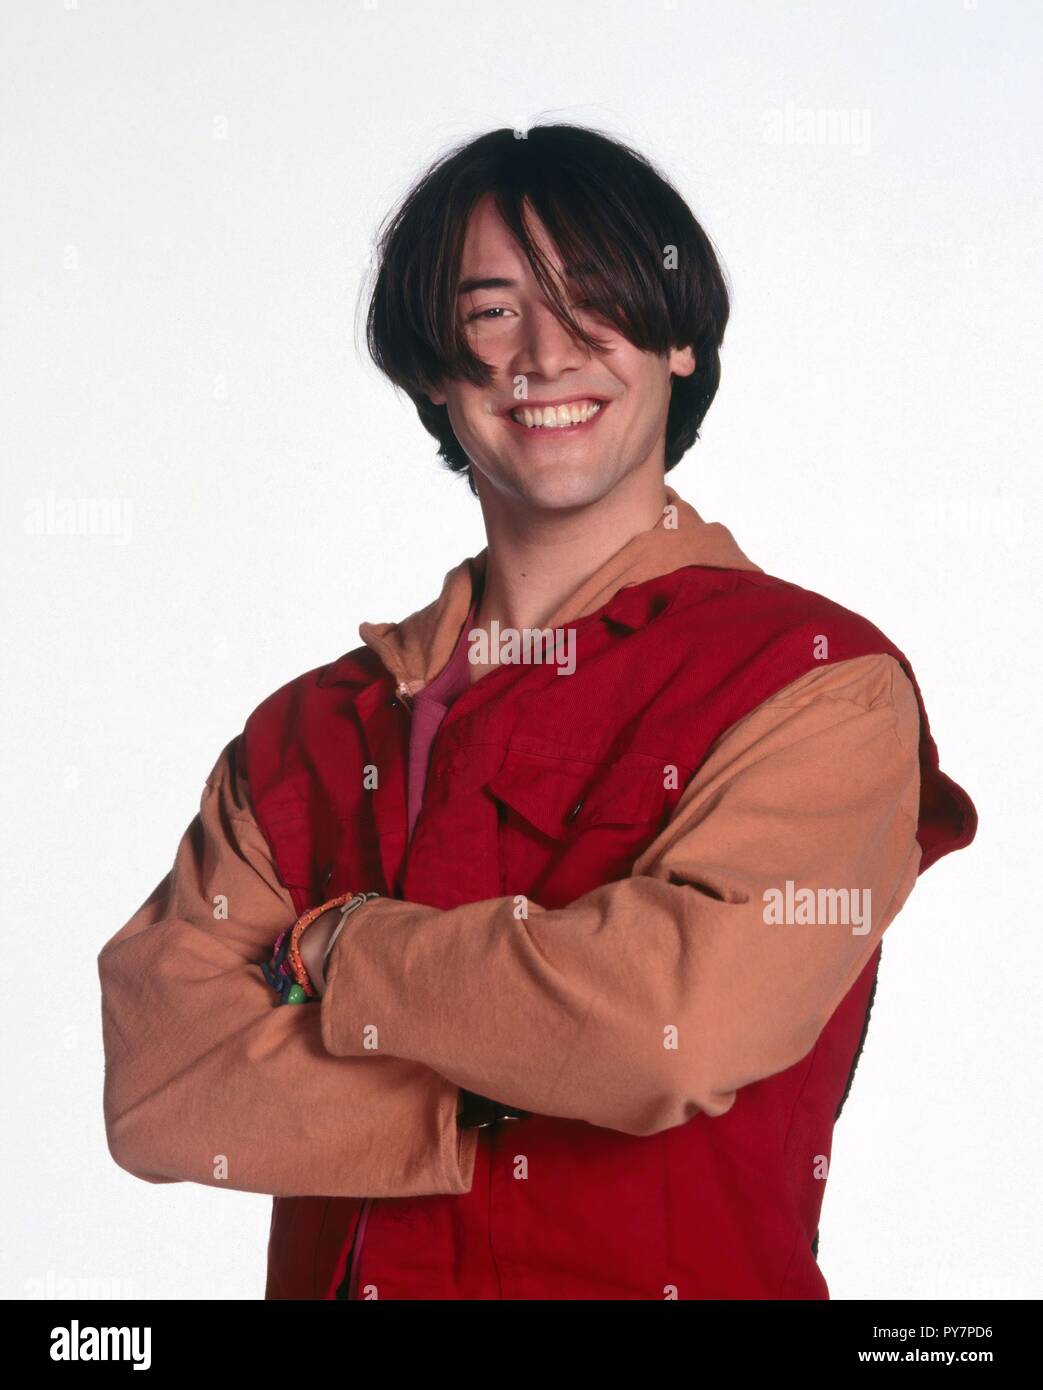 Original film title: BILL & TED'S BOGUS JOURNEY. English title: BILL & TED'S BOGUS JOURNEY. Year: 1991. Director: PETER HEWITT. Stars: KEANU REEVES. Credit: ORION PICTURES / Album Stock Photo